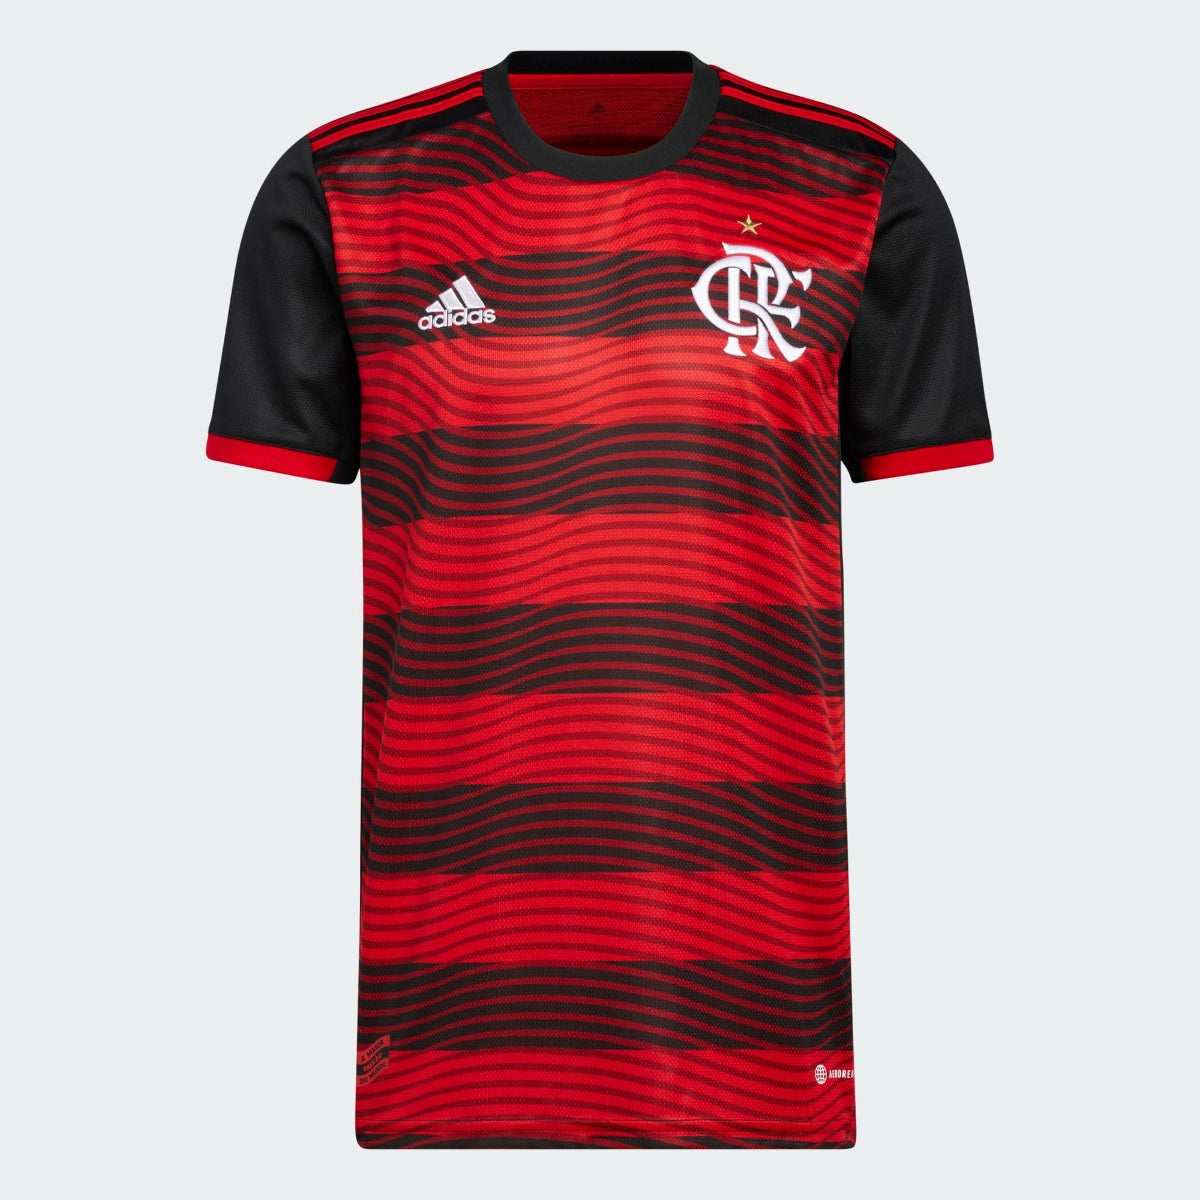 adidas 2022 CR Flamengo Home Jersey - Red-Black (Front)